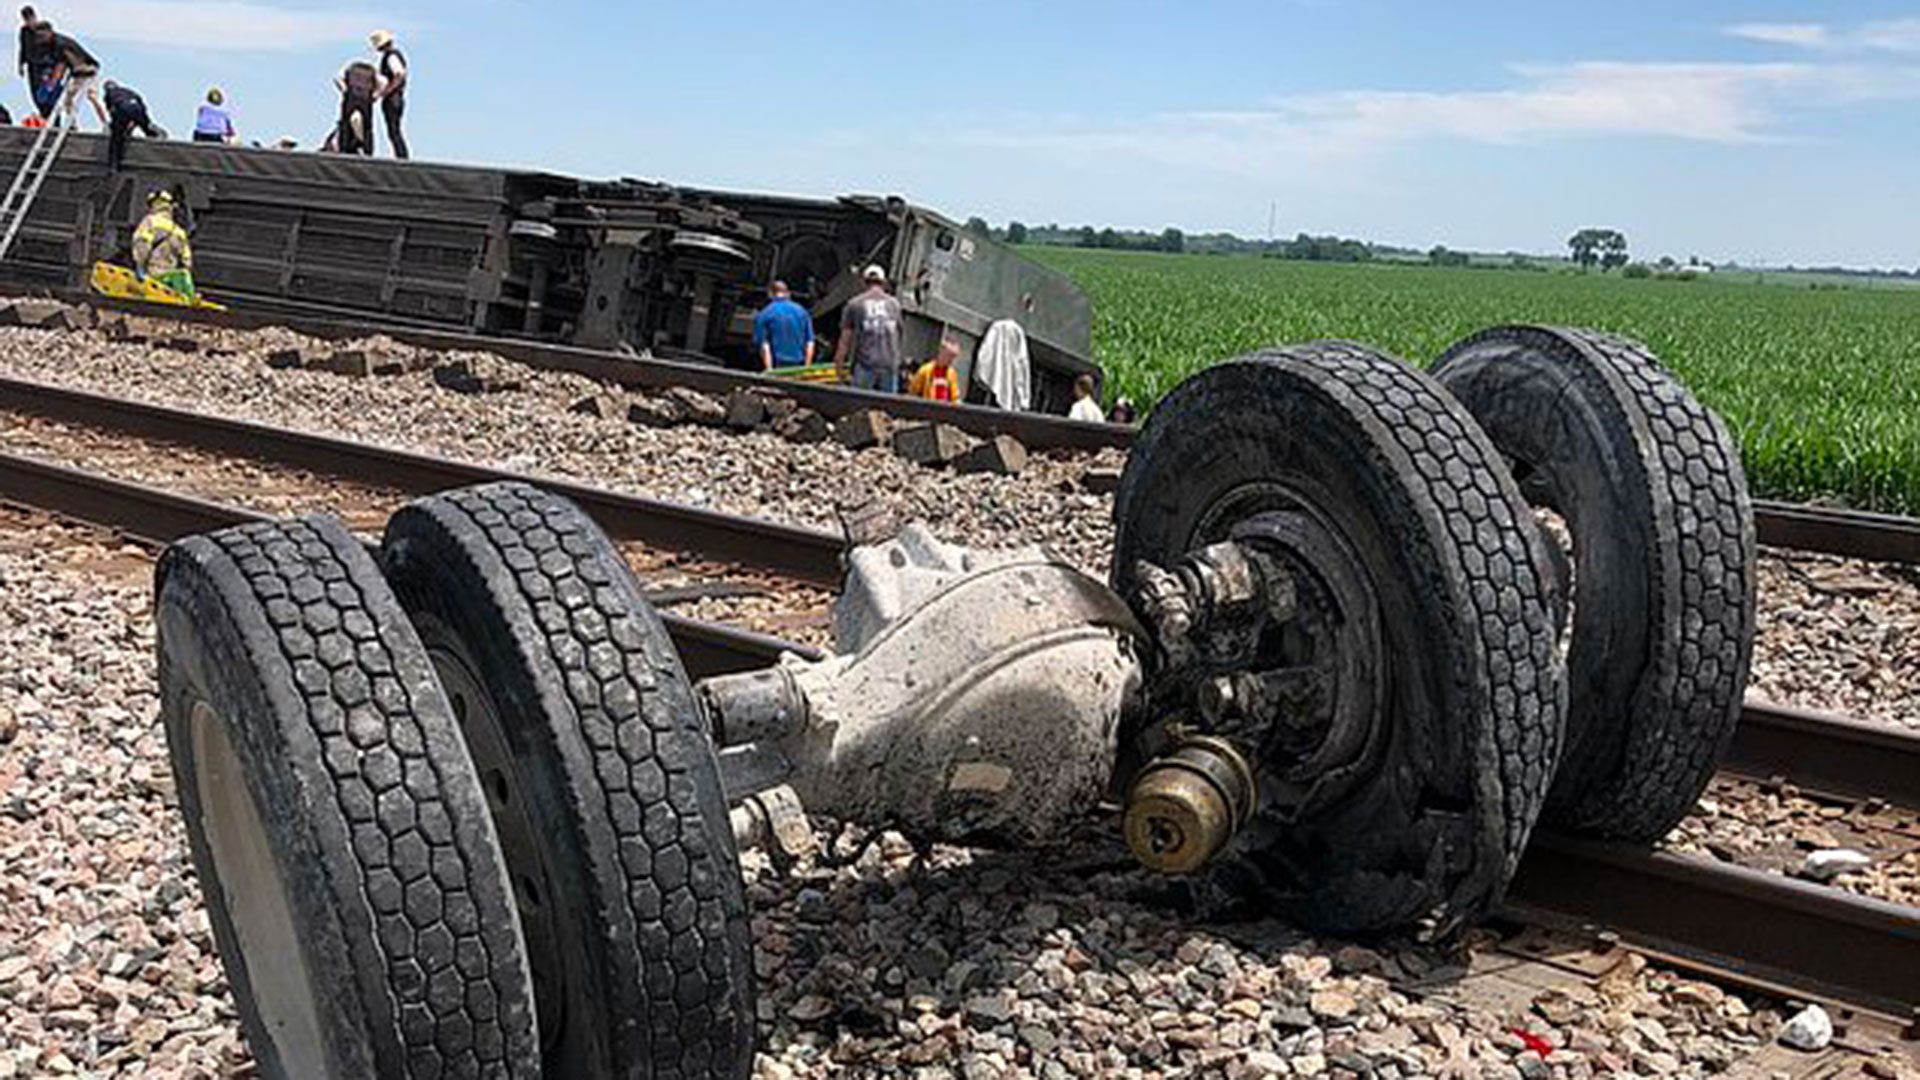 The train derailed as Tipper collided with the truck